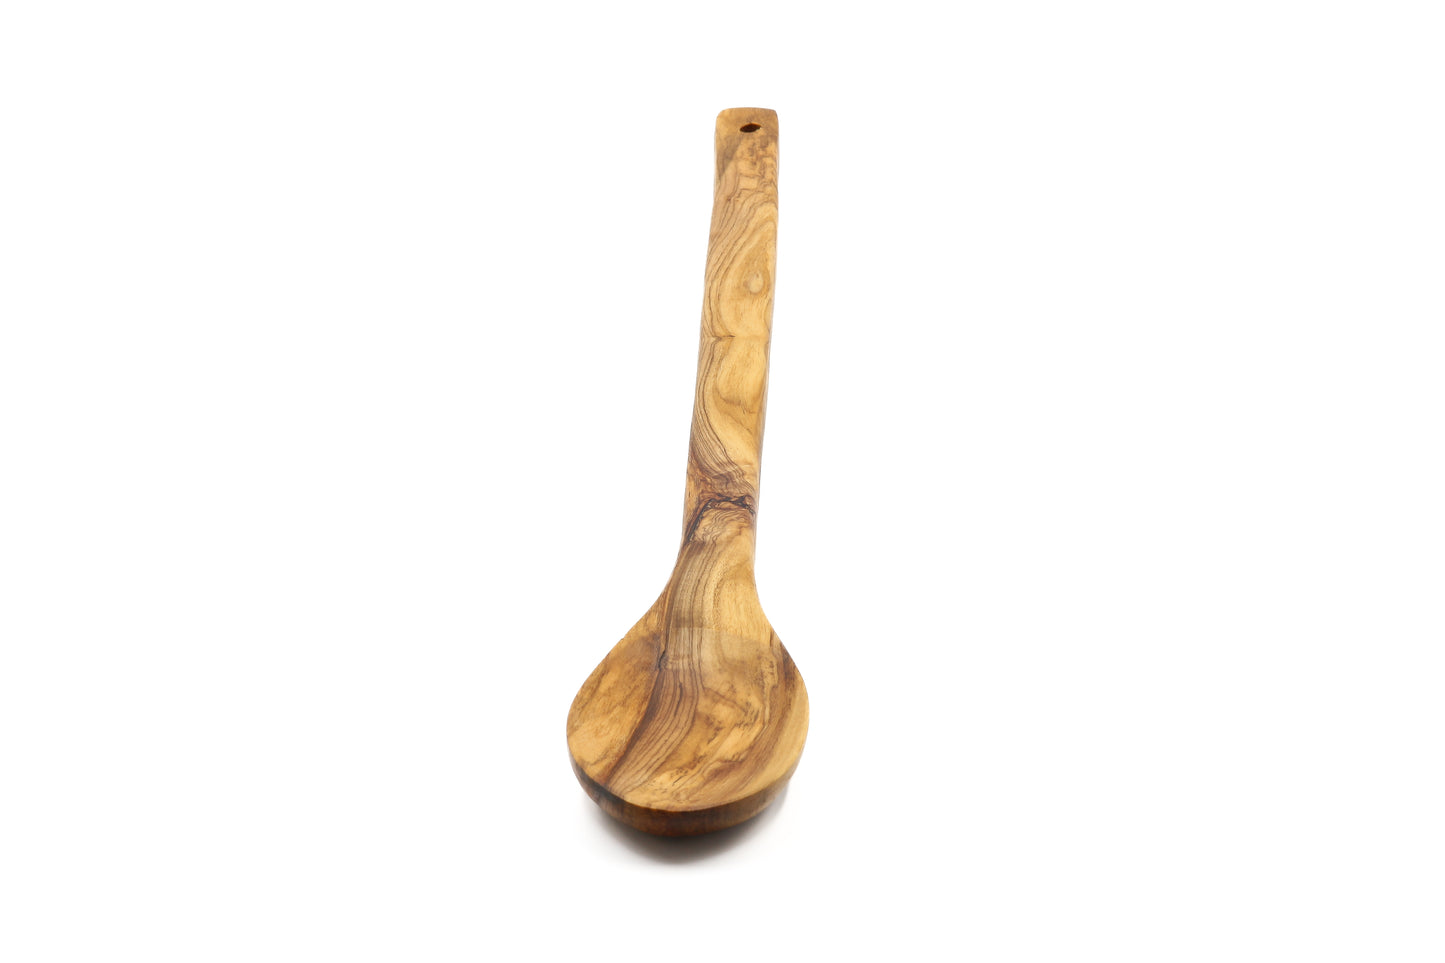 Crafted from beautiful olive wood, this spoon is a kitchen essential